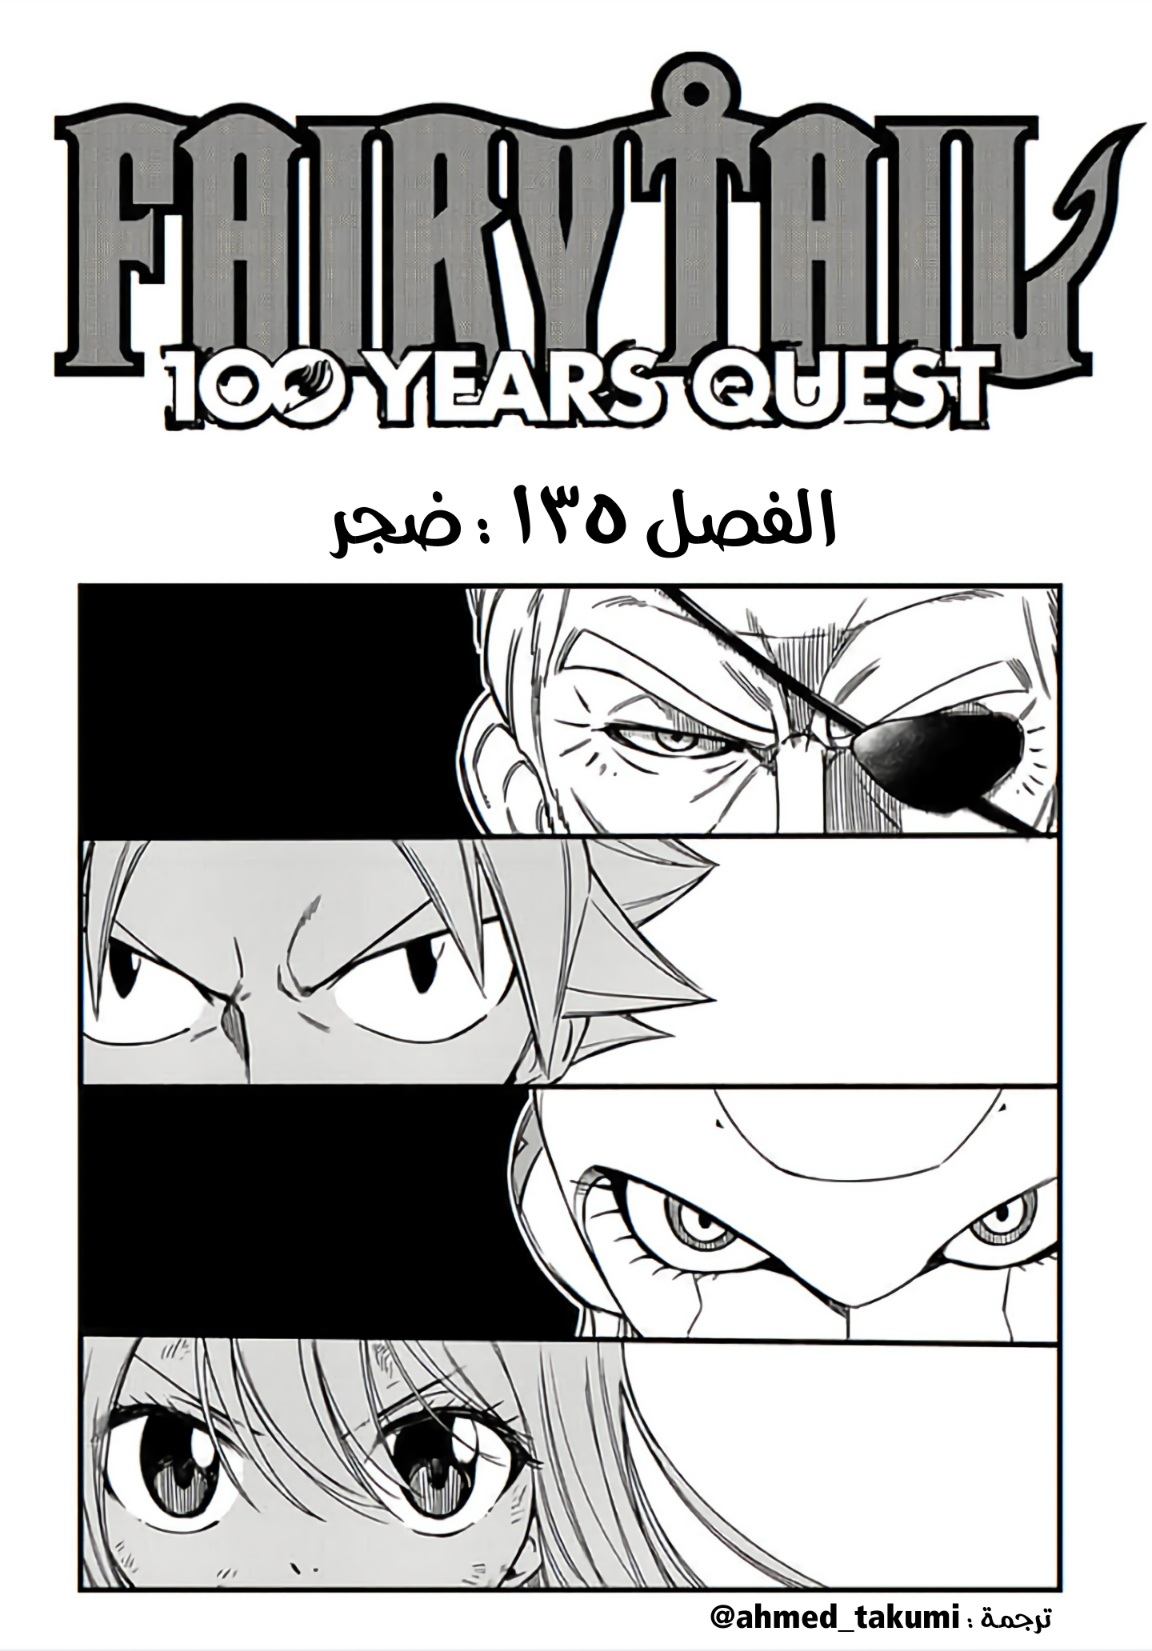 Fairy Tail 100 Years Quest: Chapter 135 - Page 1